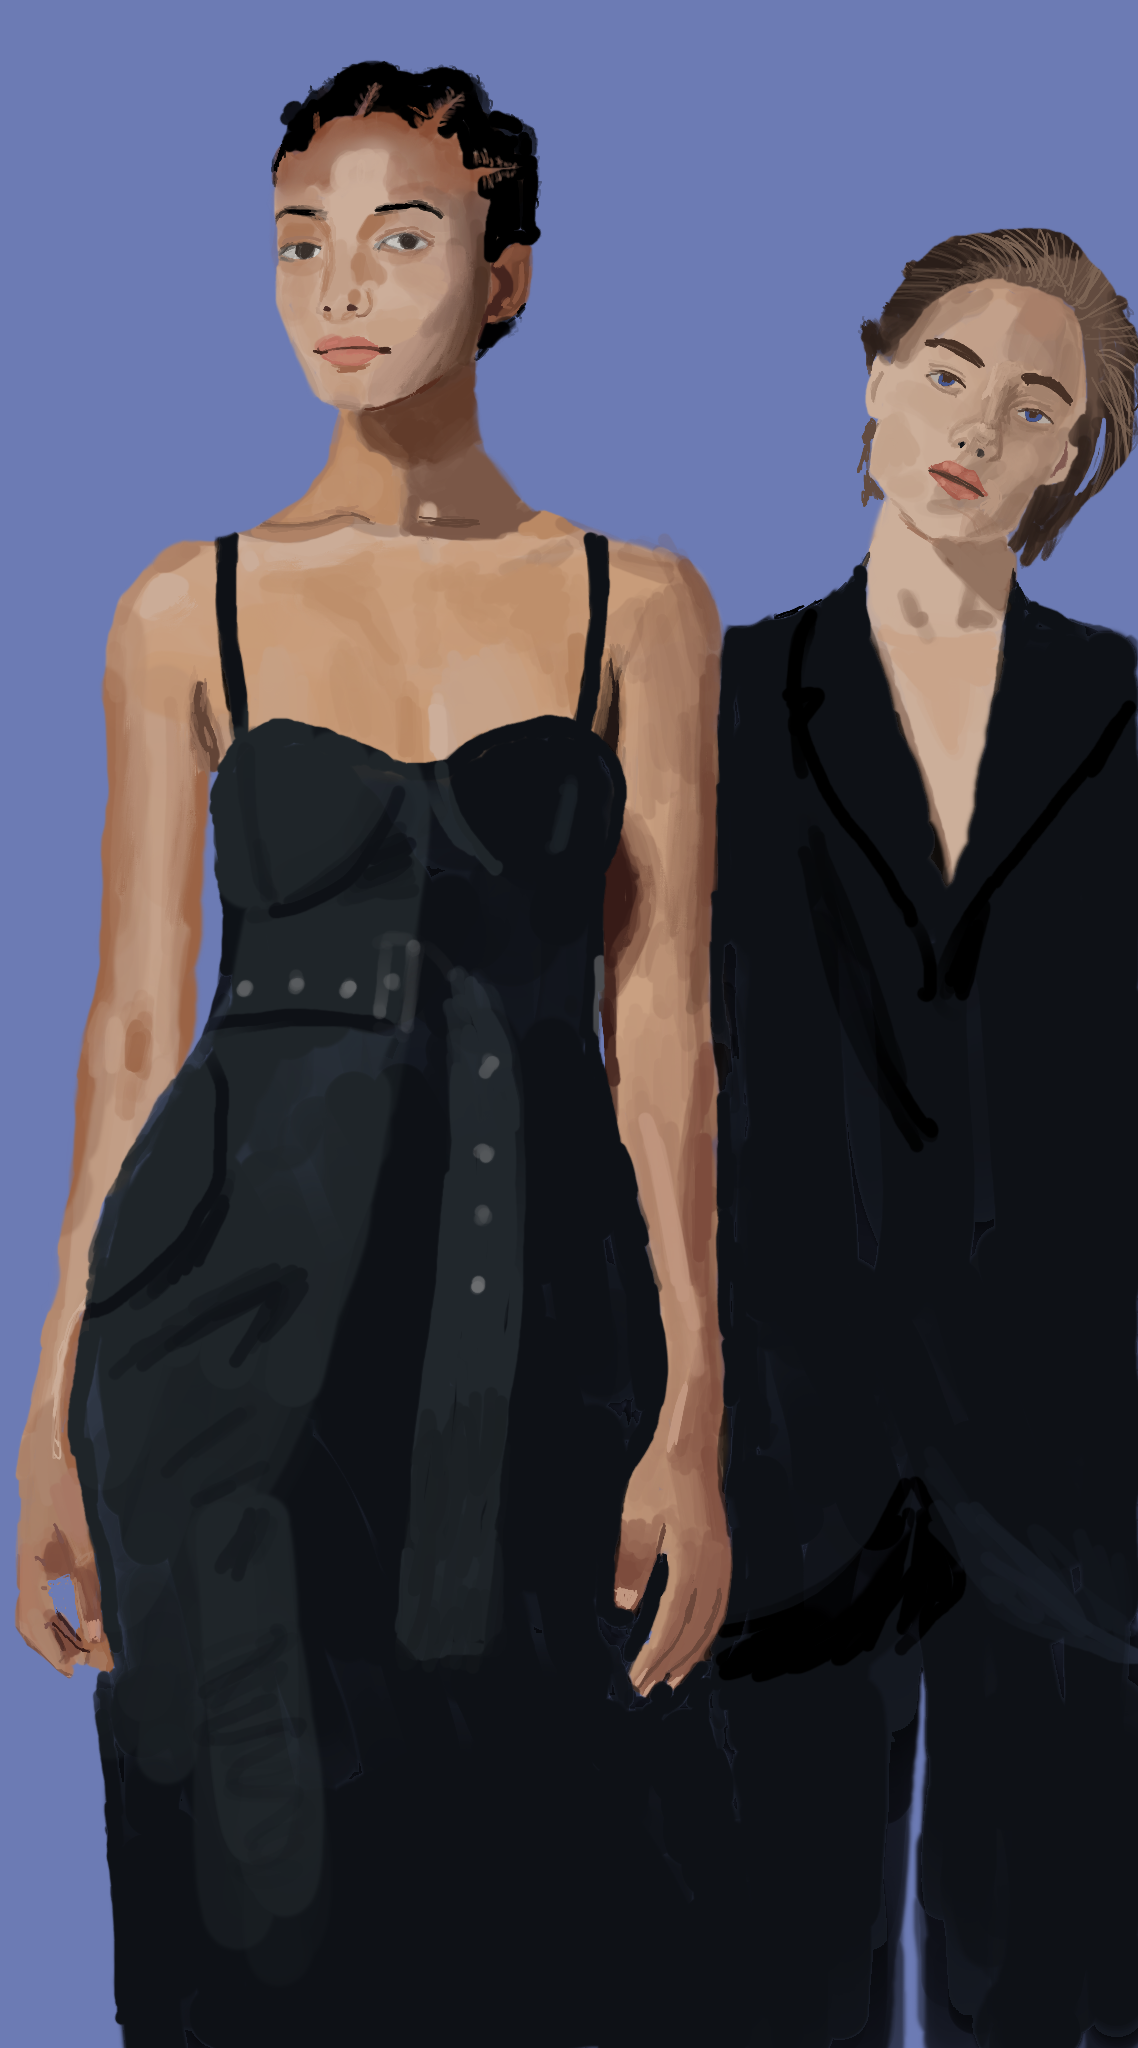 Two models: the left woman is wearing a dress and the right woman is wearing a pantsuit.